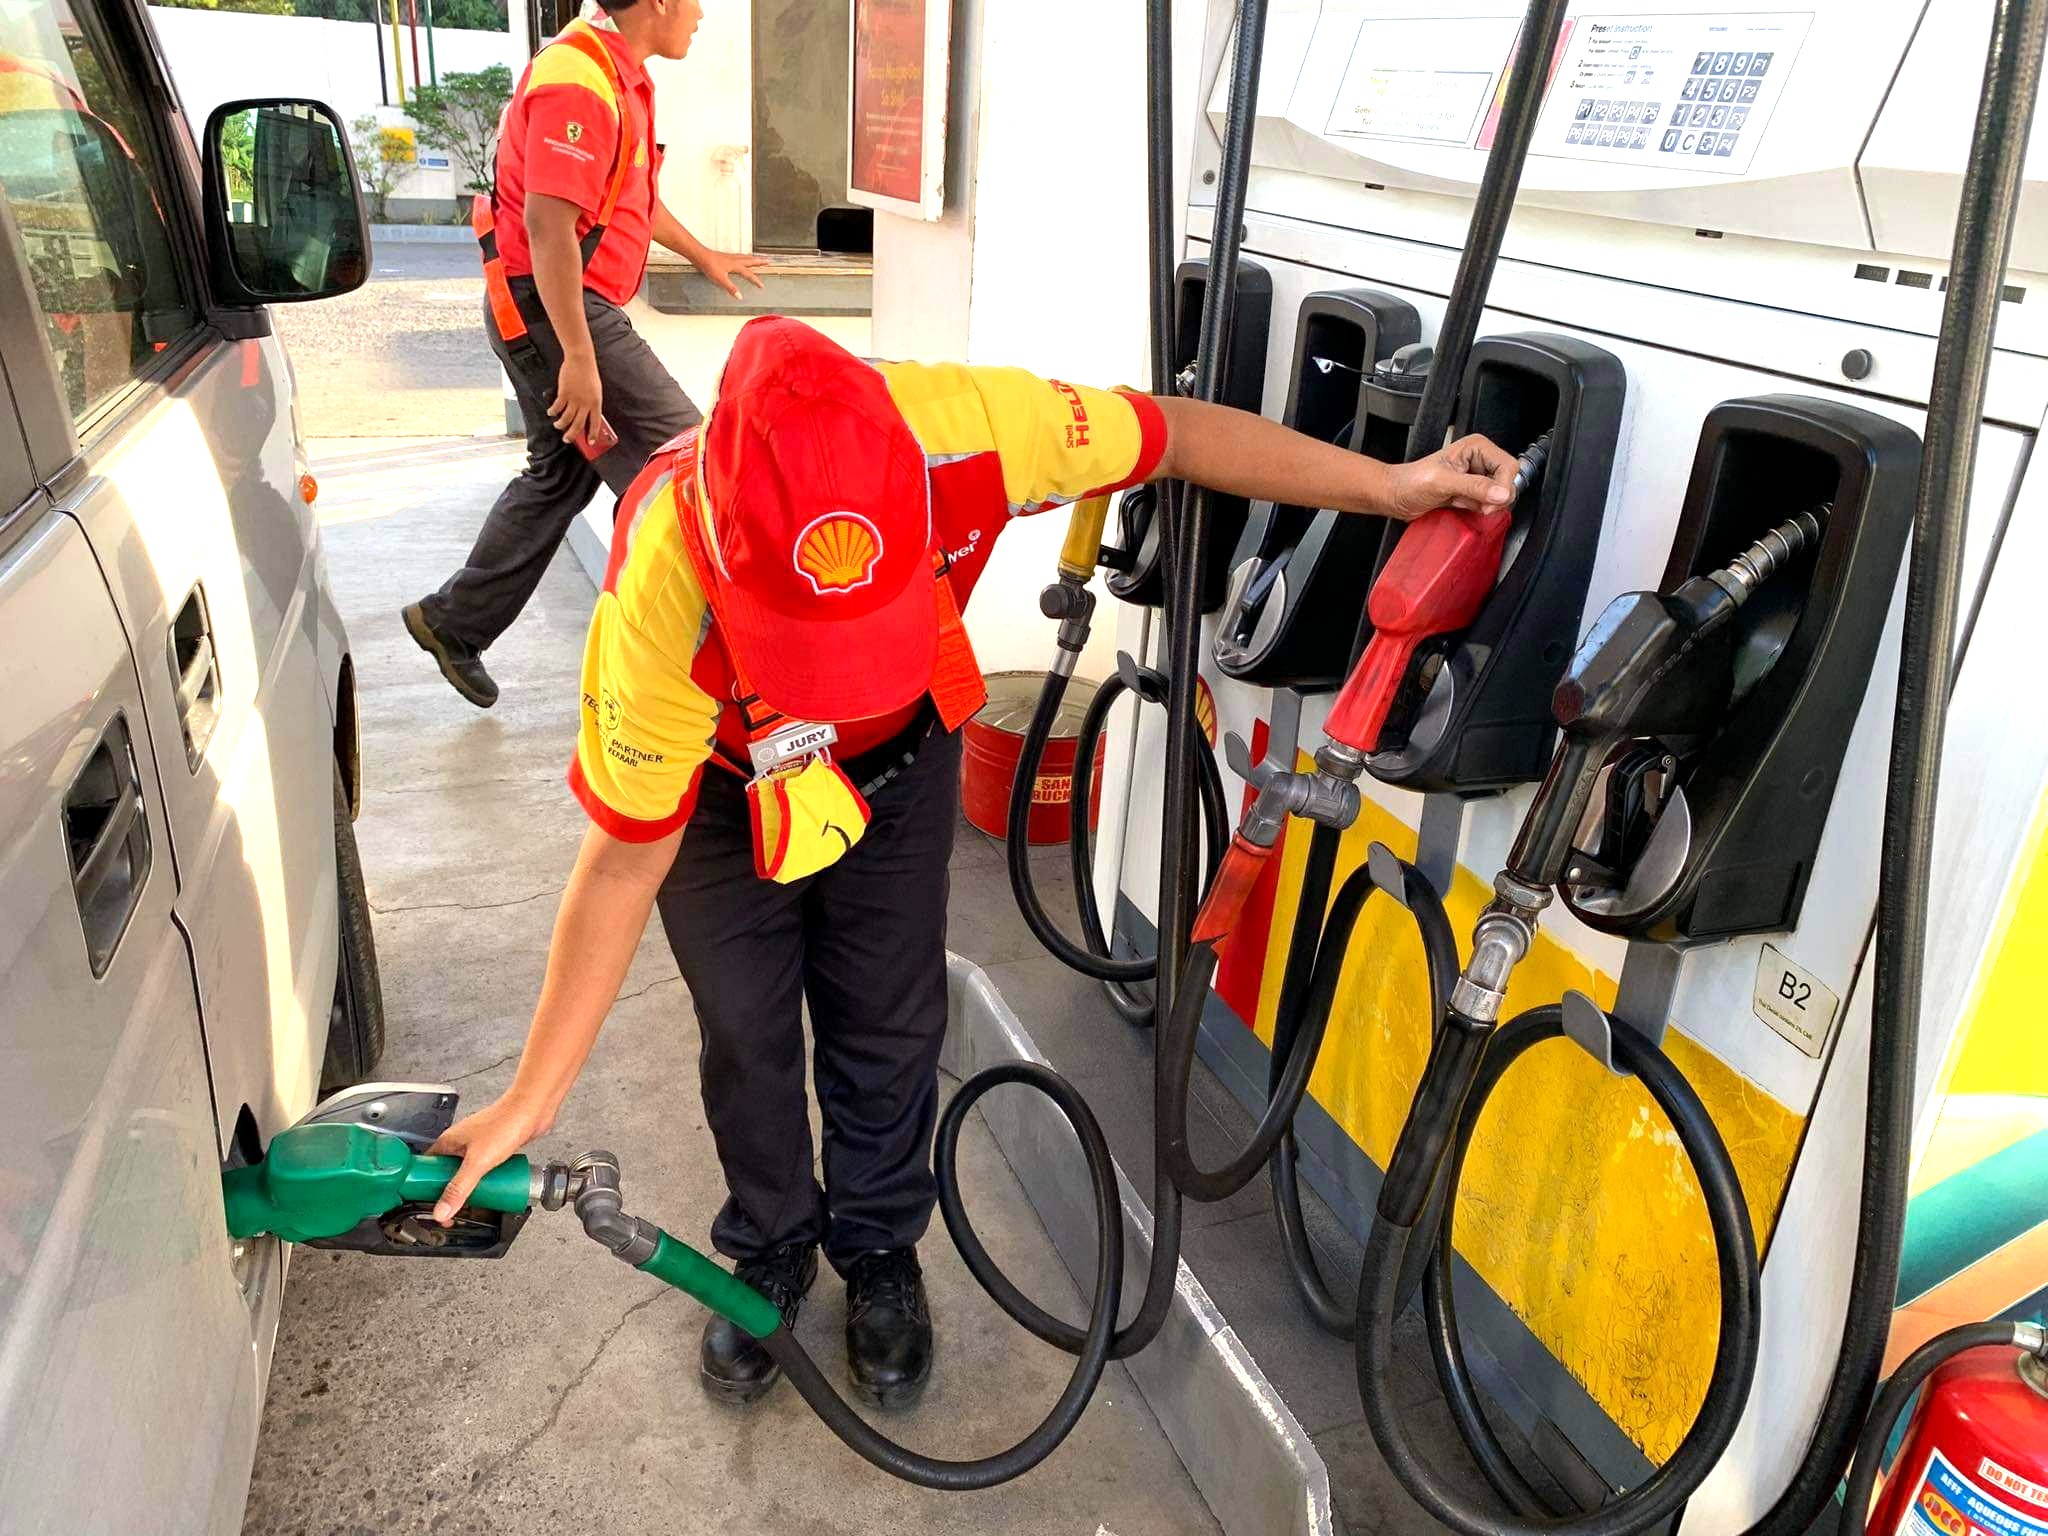 An employee fills up a car's fuel tank at a gasoline station